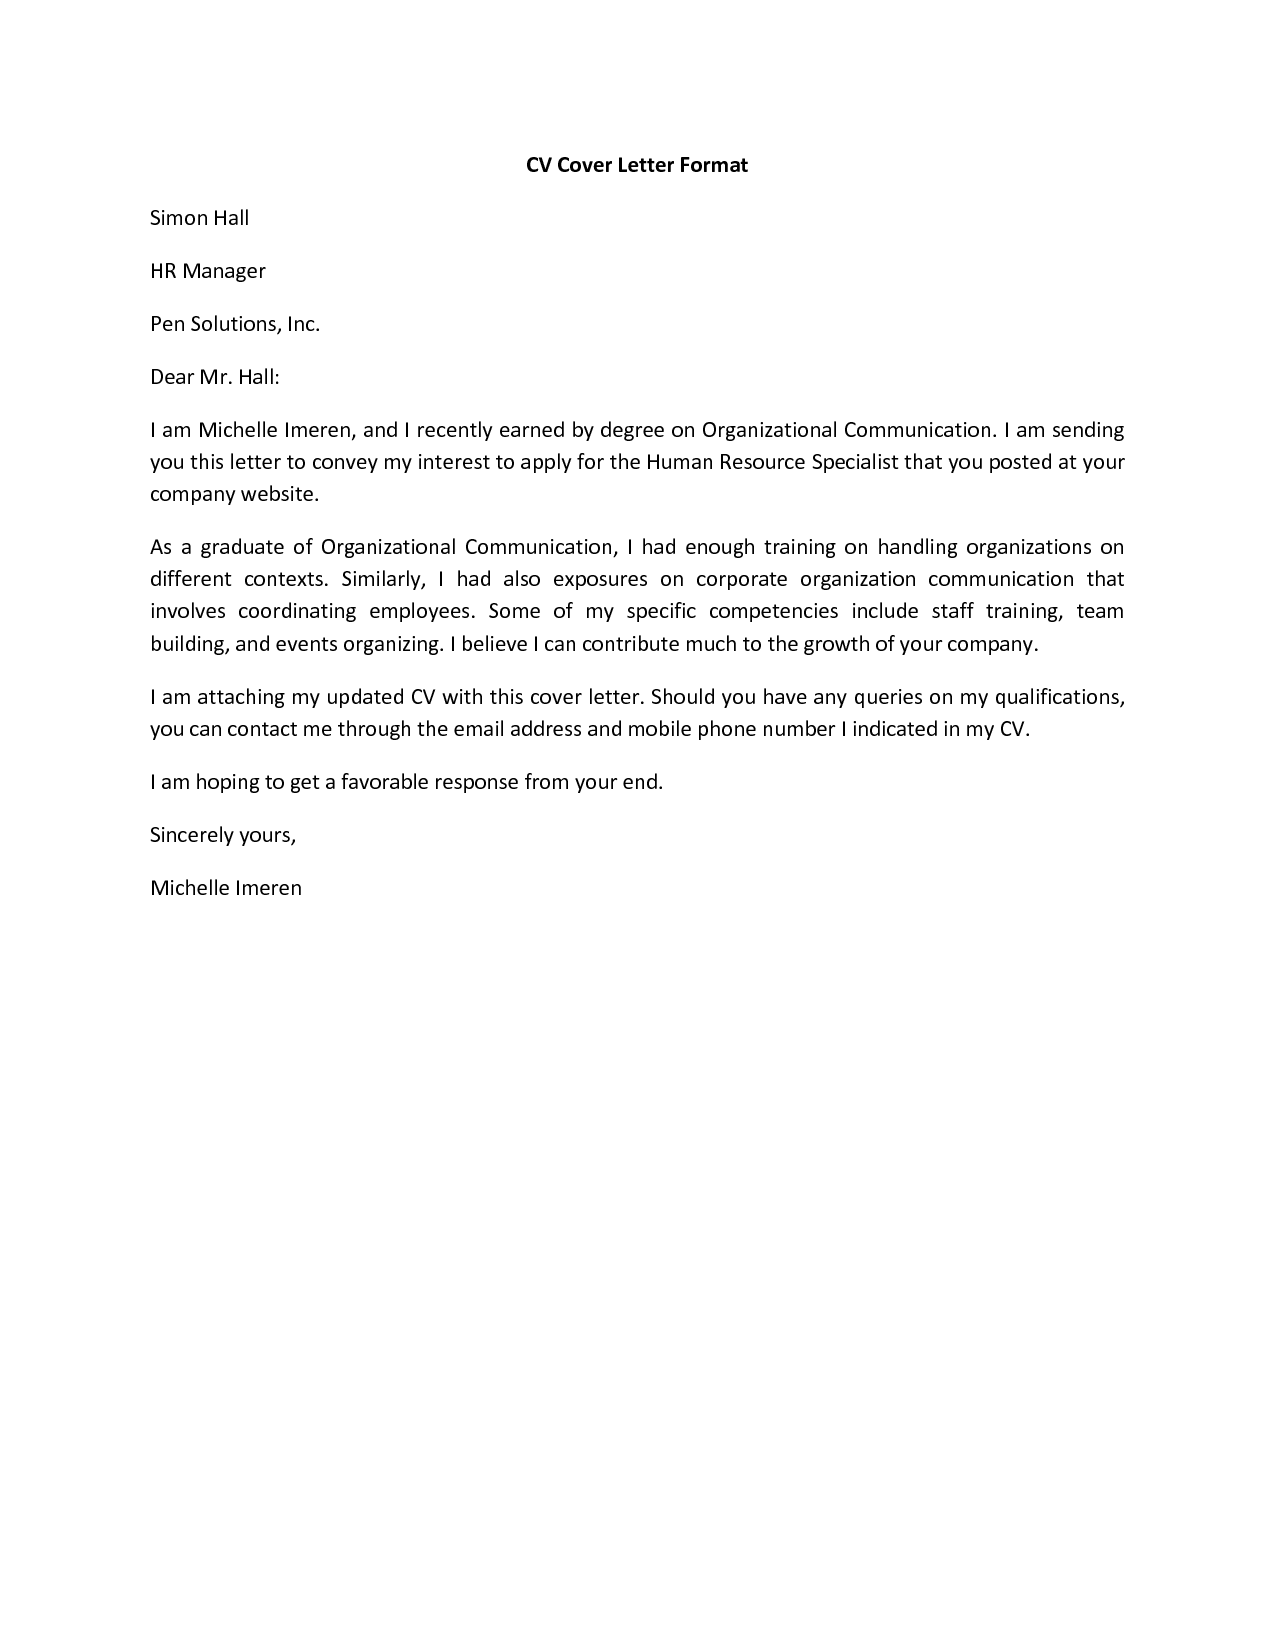 cover letter examples for resume